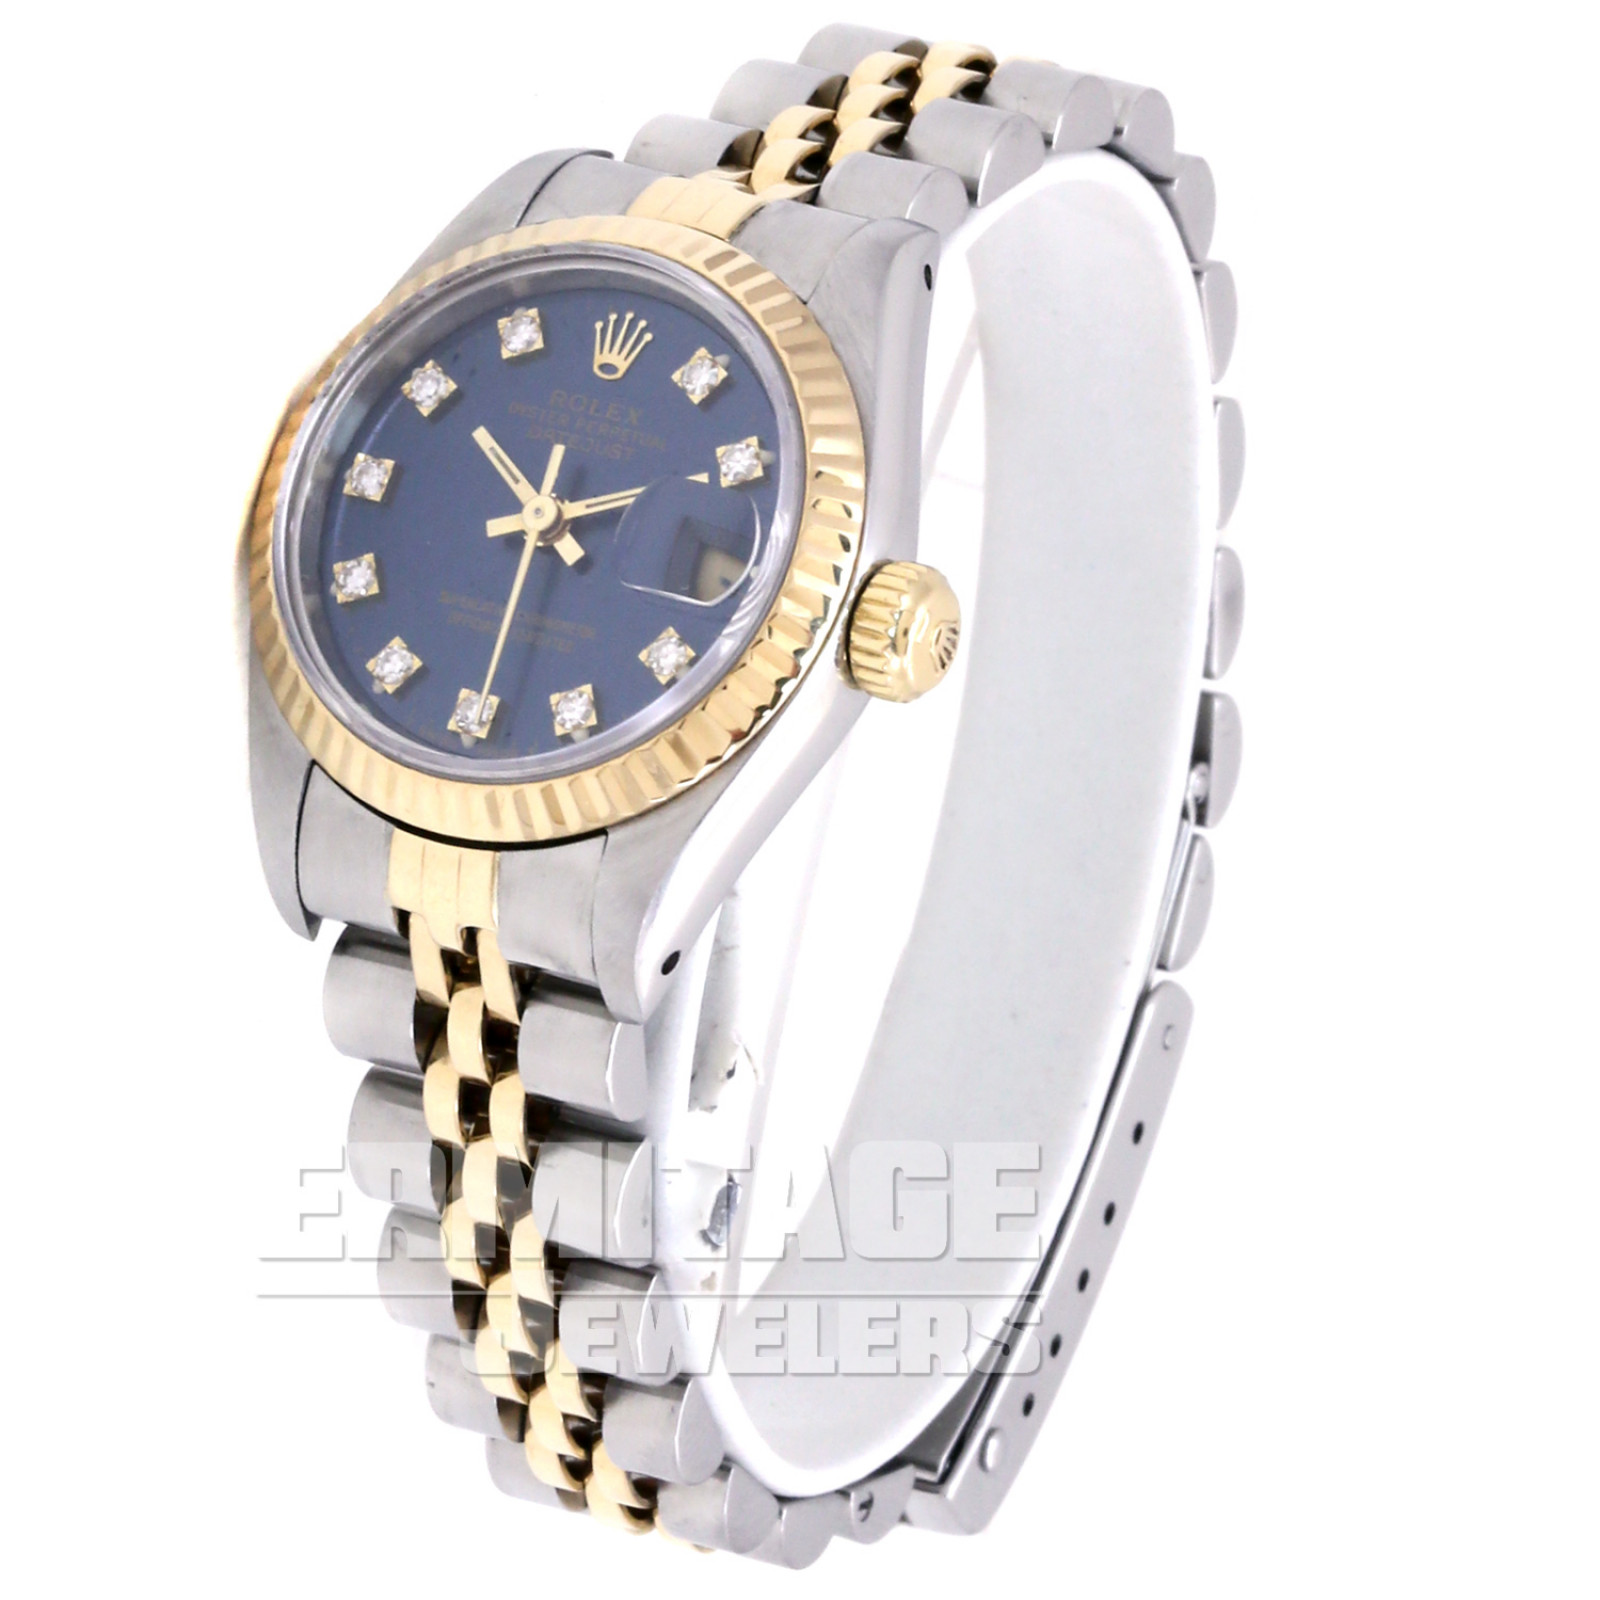 Diamond Rolex Datejust 69173 with Blue Dial